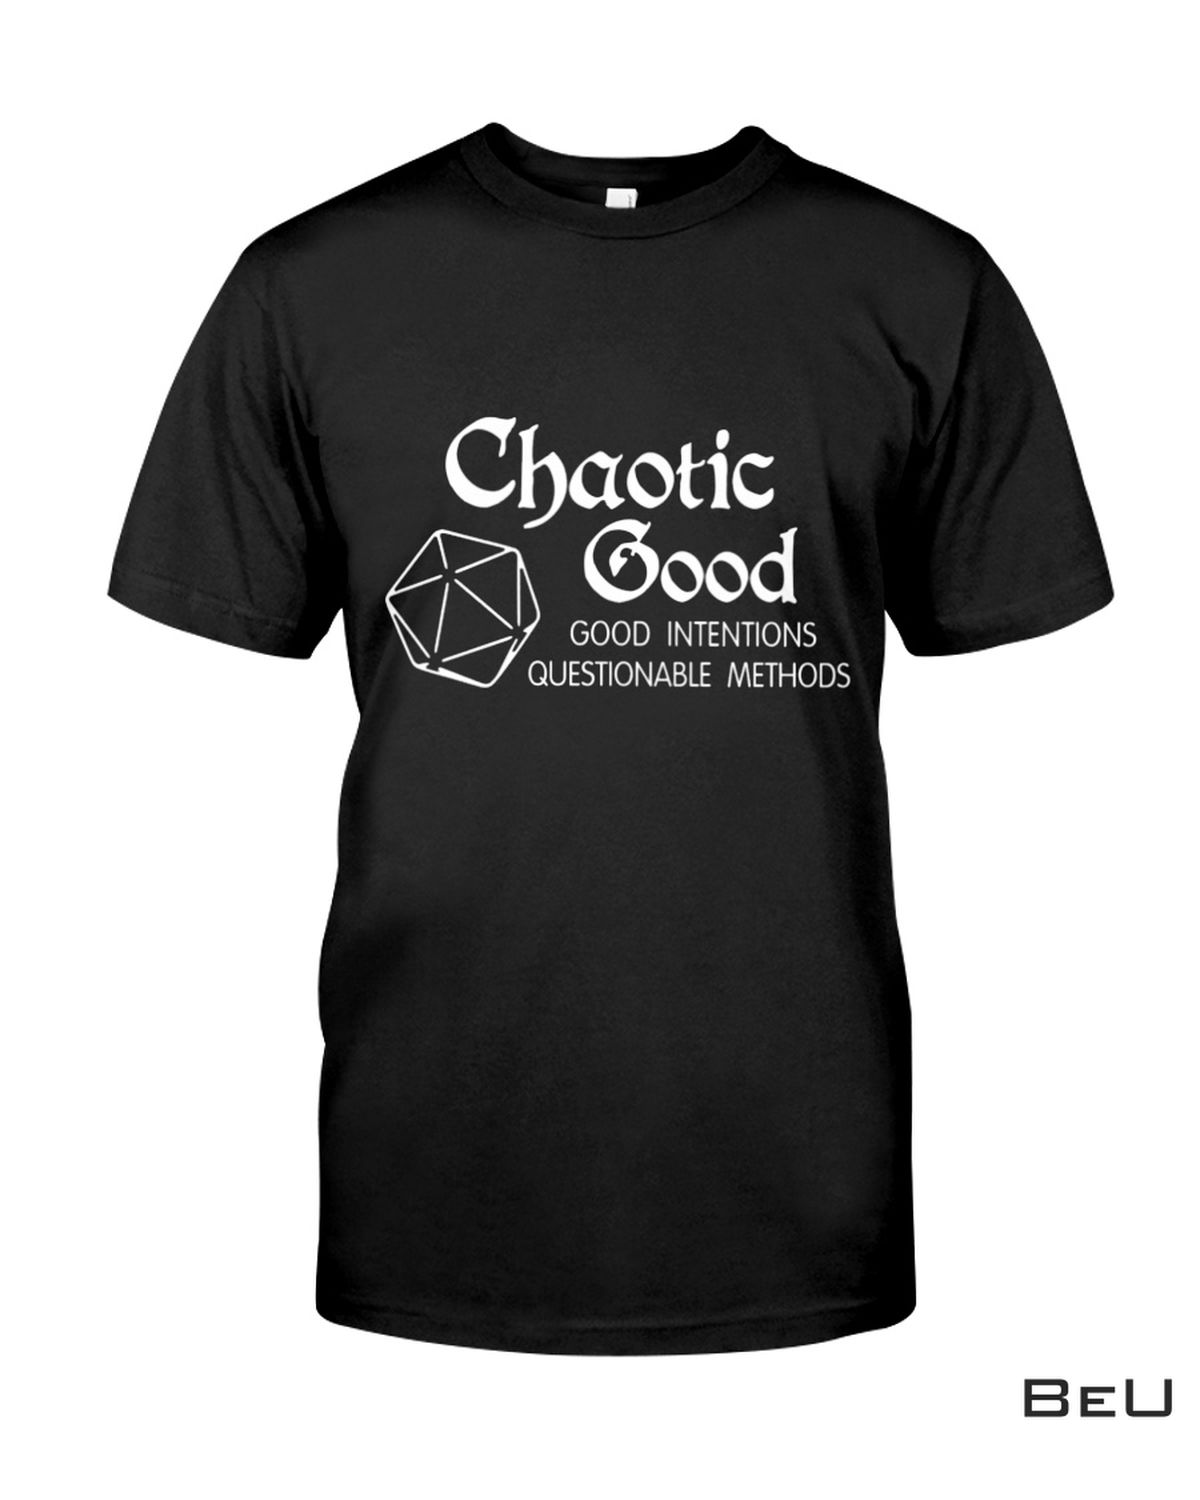 Chaotic Good Good Intentions Questionable Methods Shirt